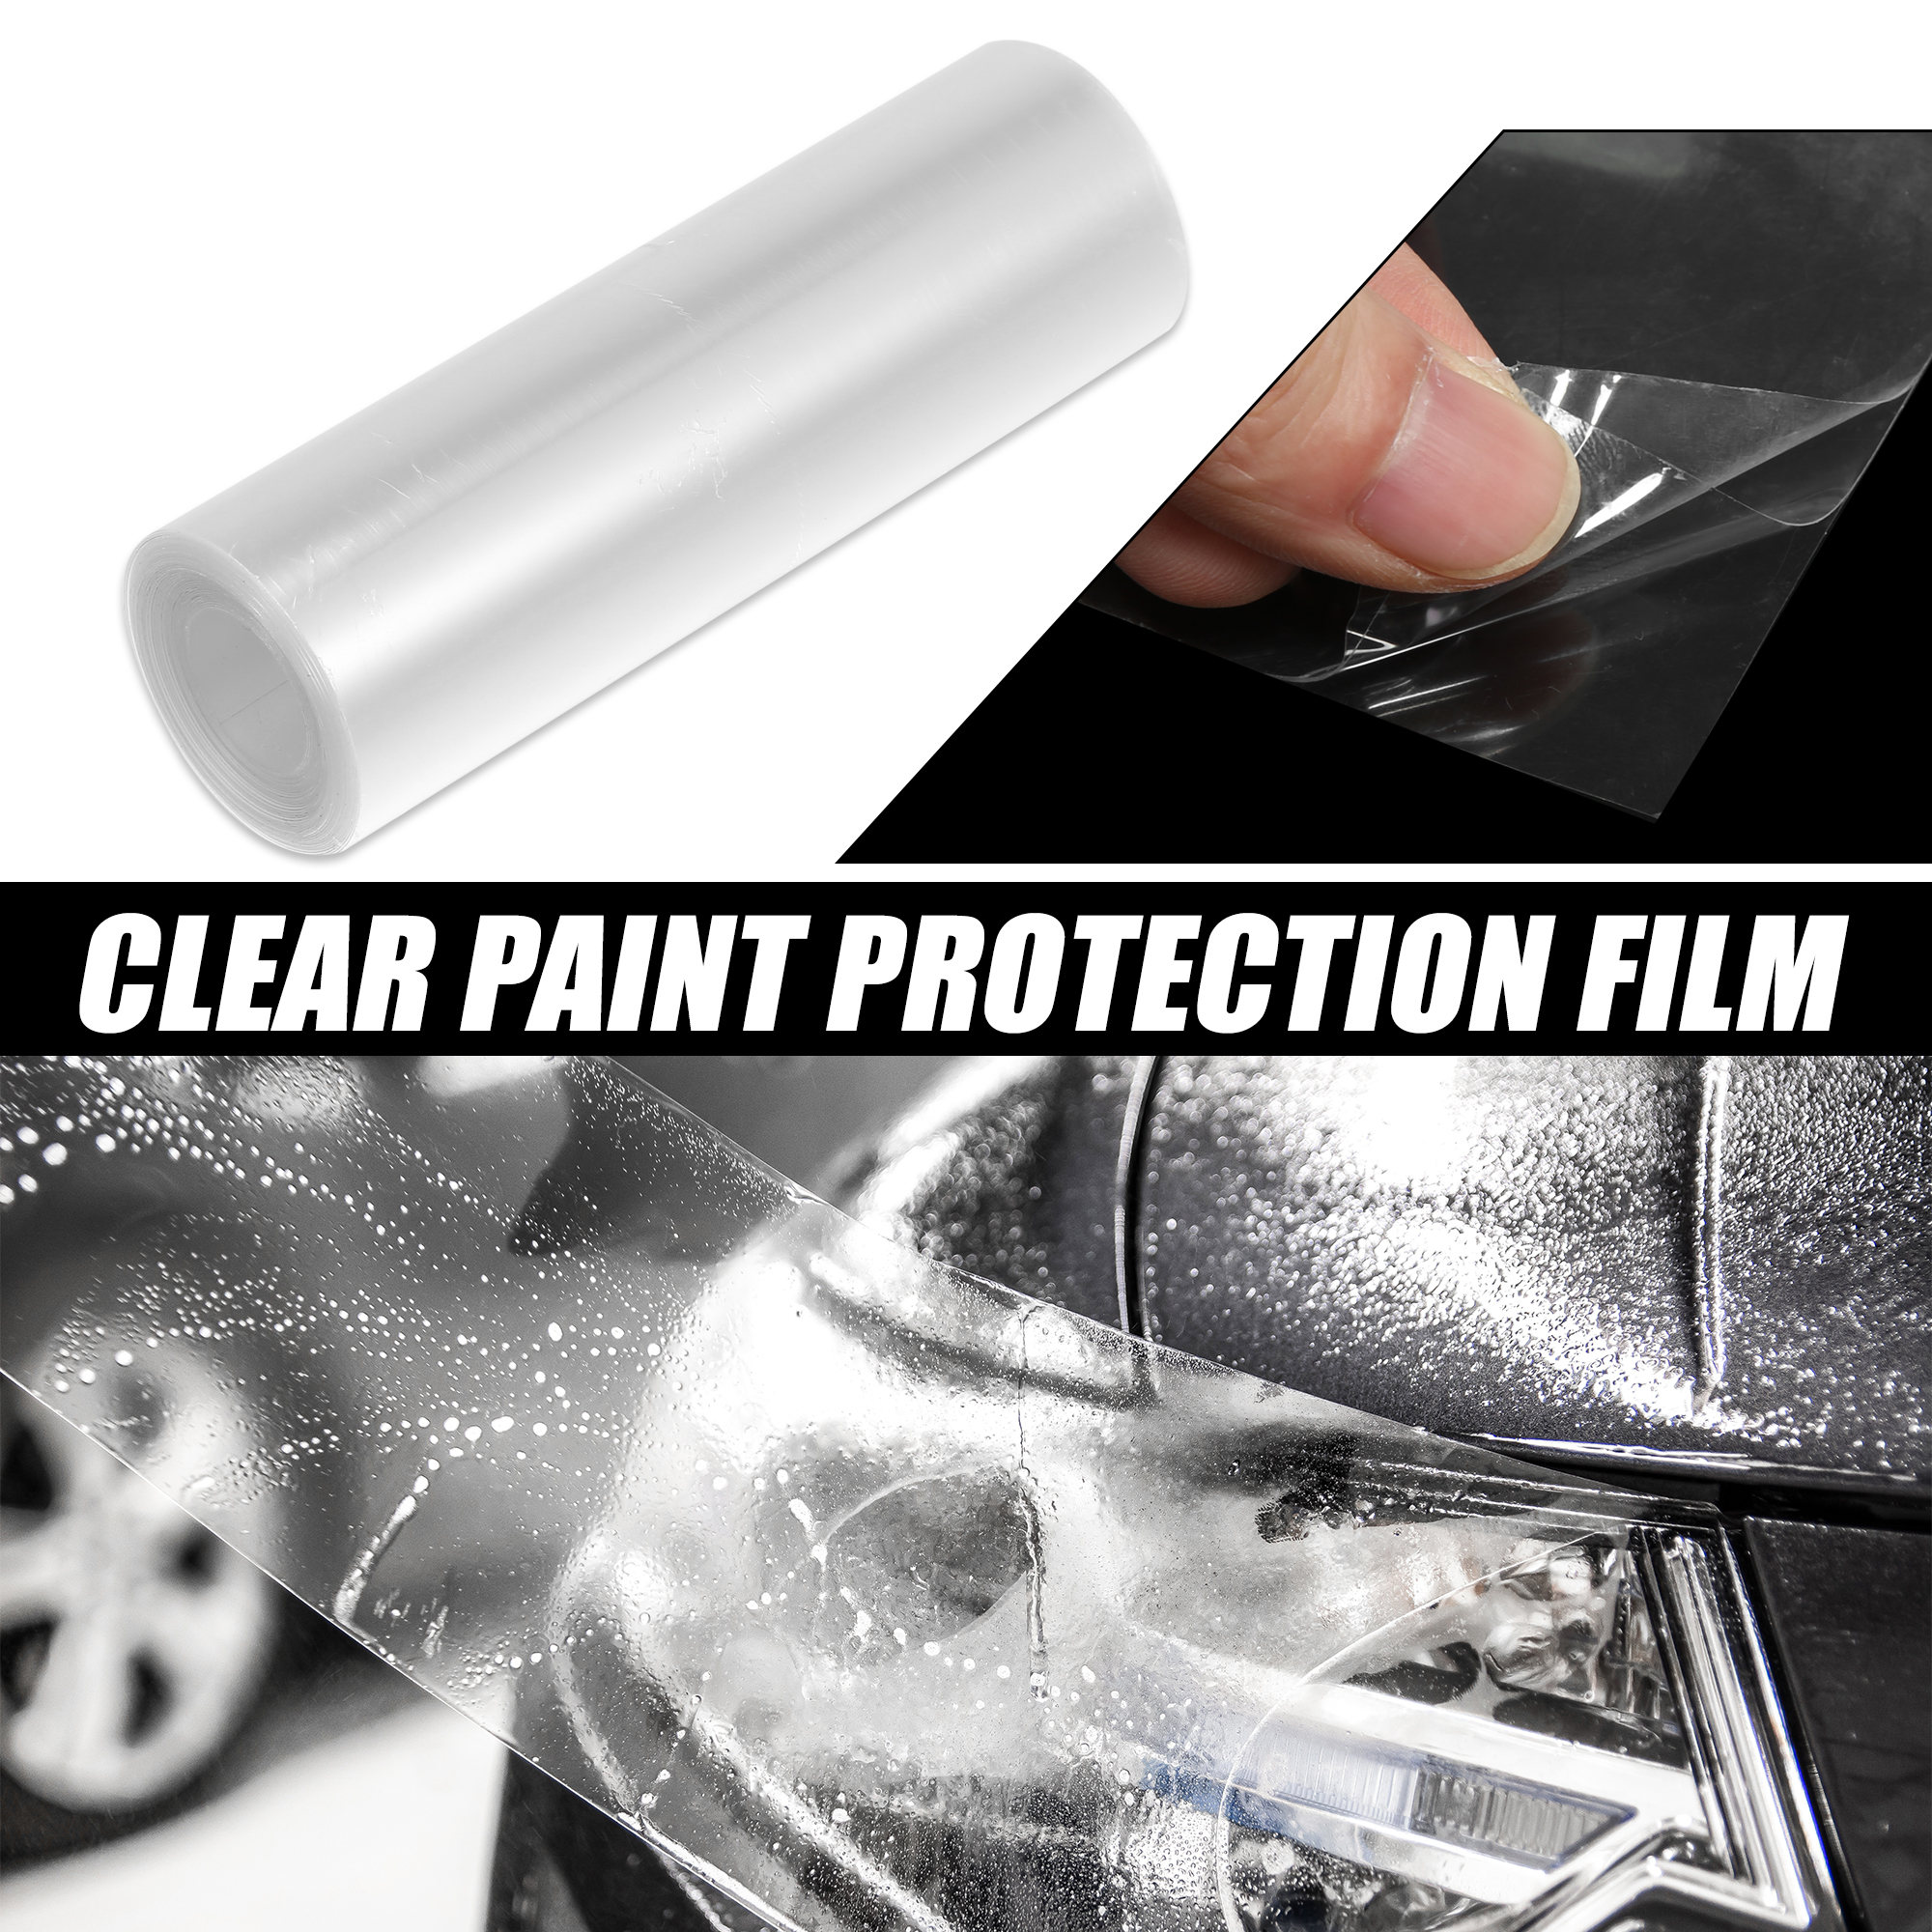 Clear Vinyl Car Paint Protection Film Cover Decal Scratch Resistant Self  Adhesive Sticker Universal 4x118 